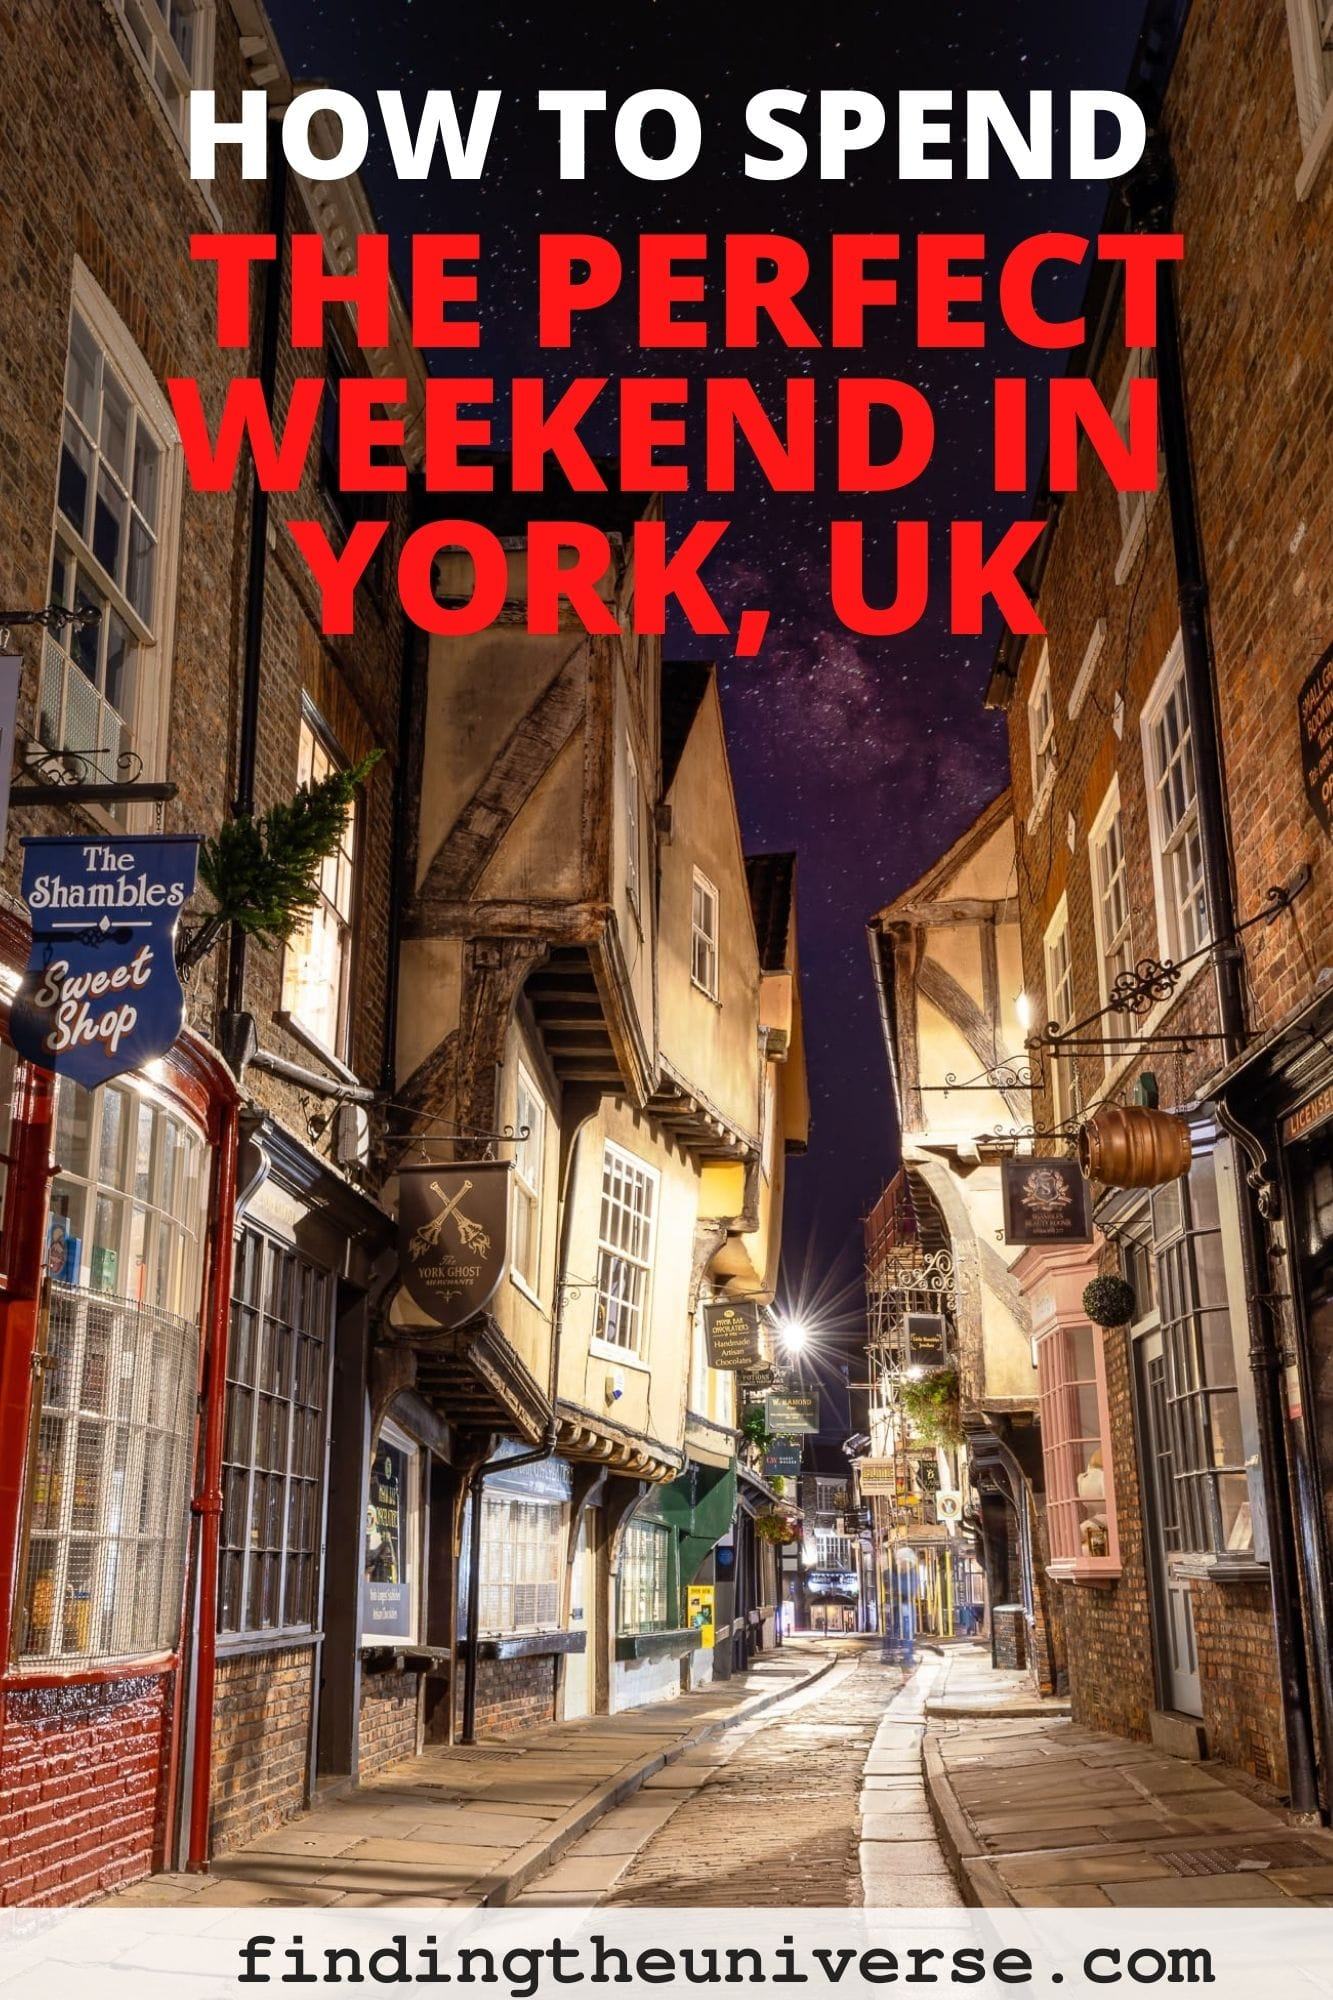 A weekend travel guide to York, UK - The Travel Hack